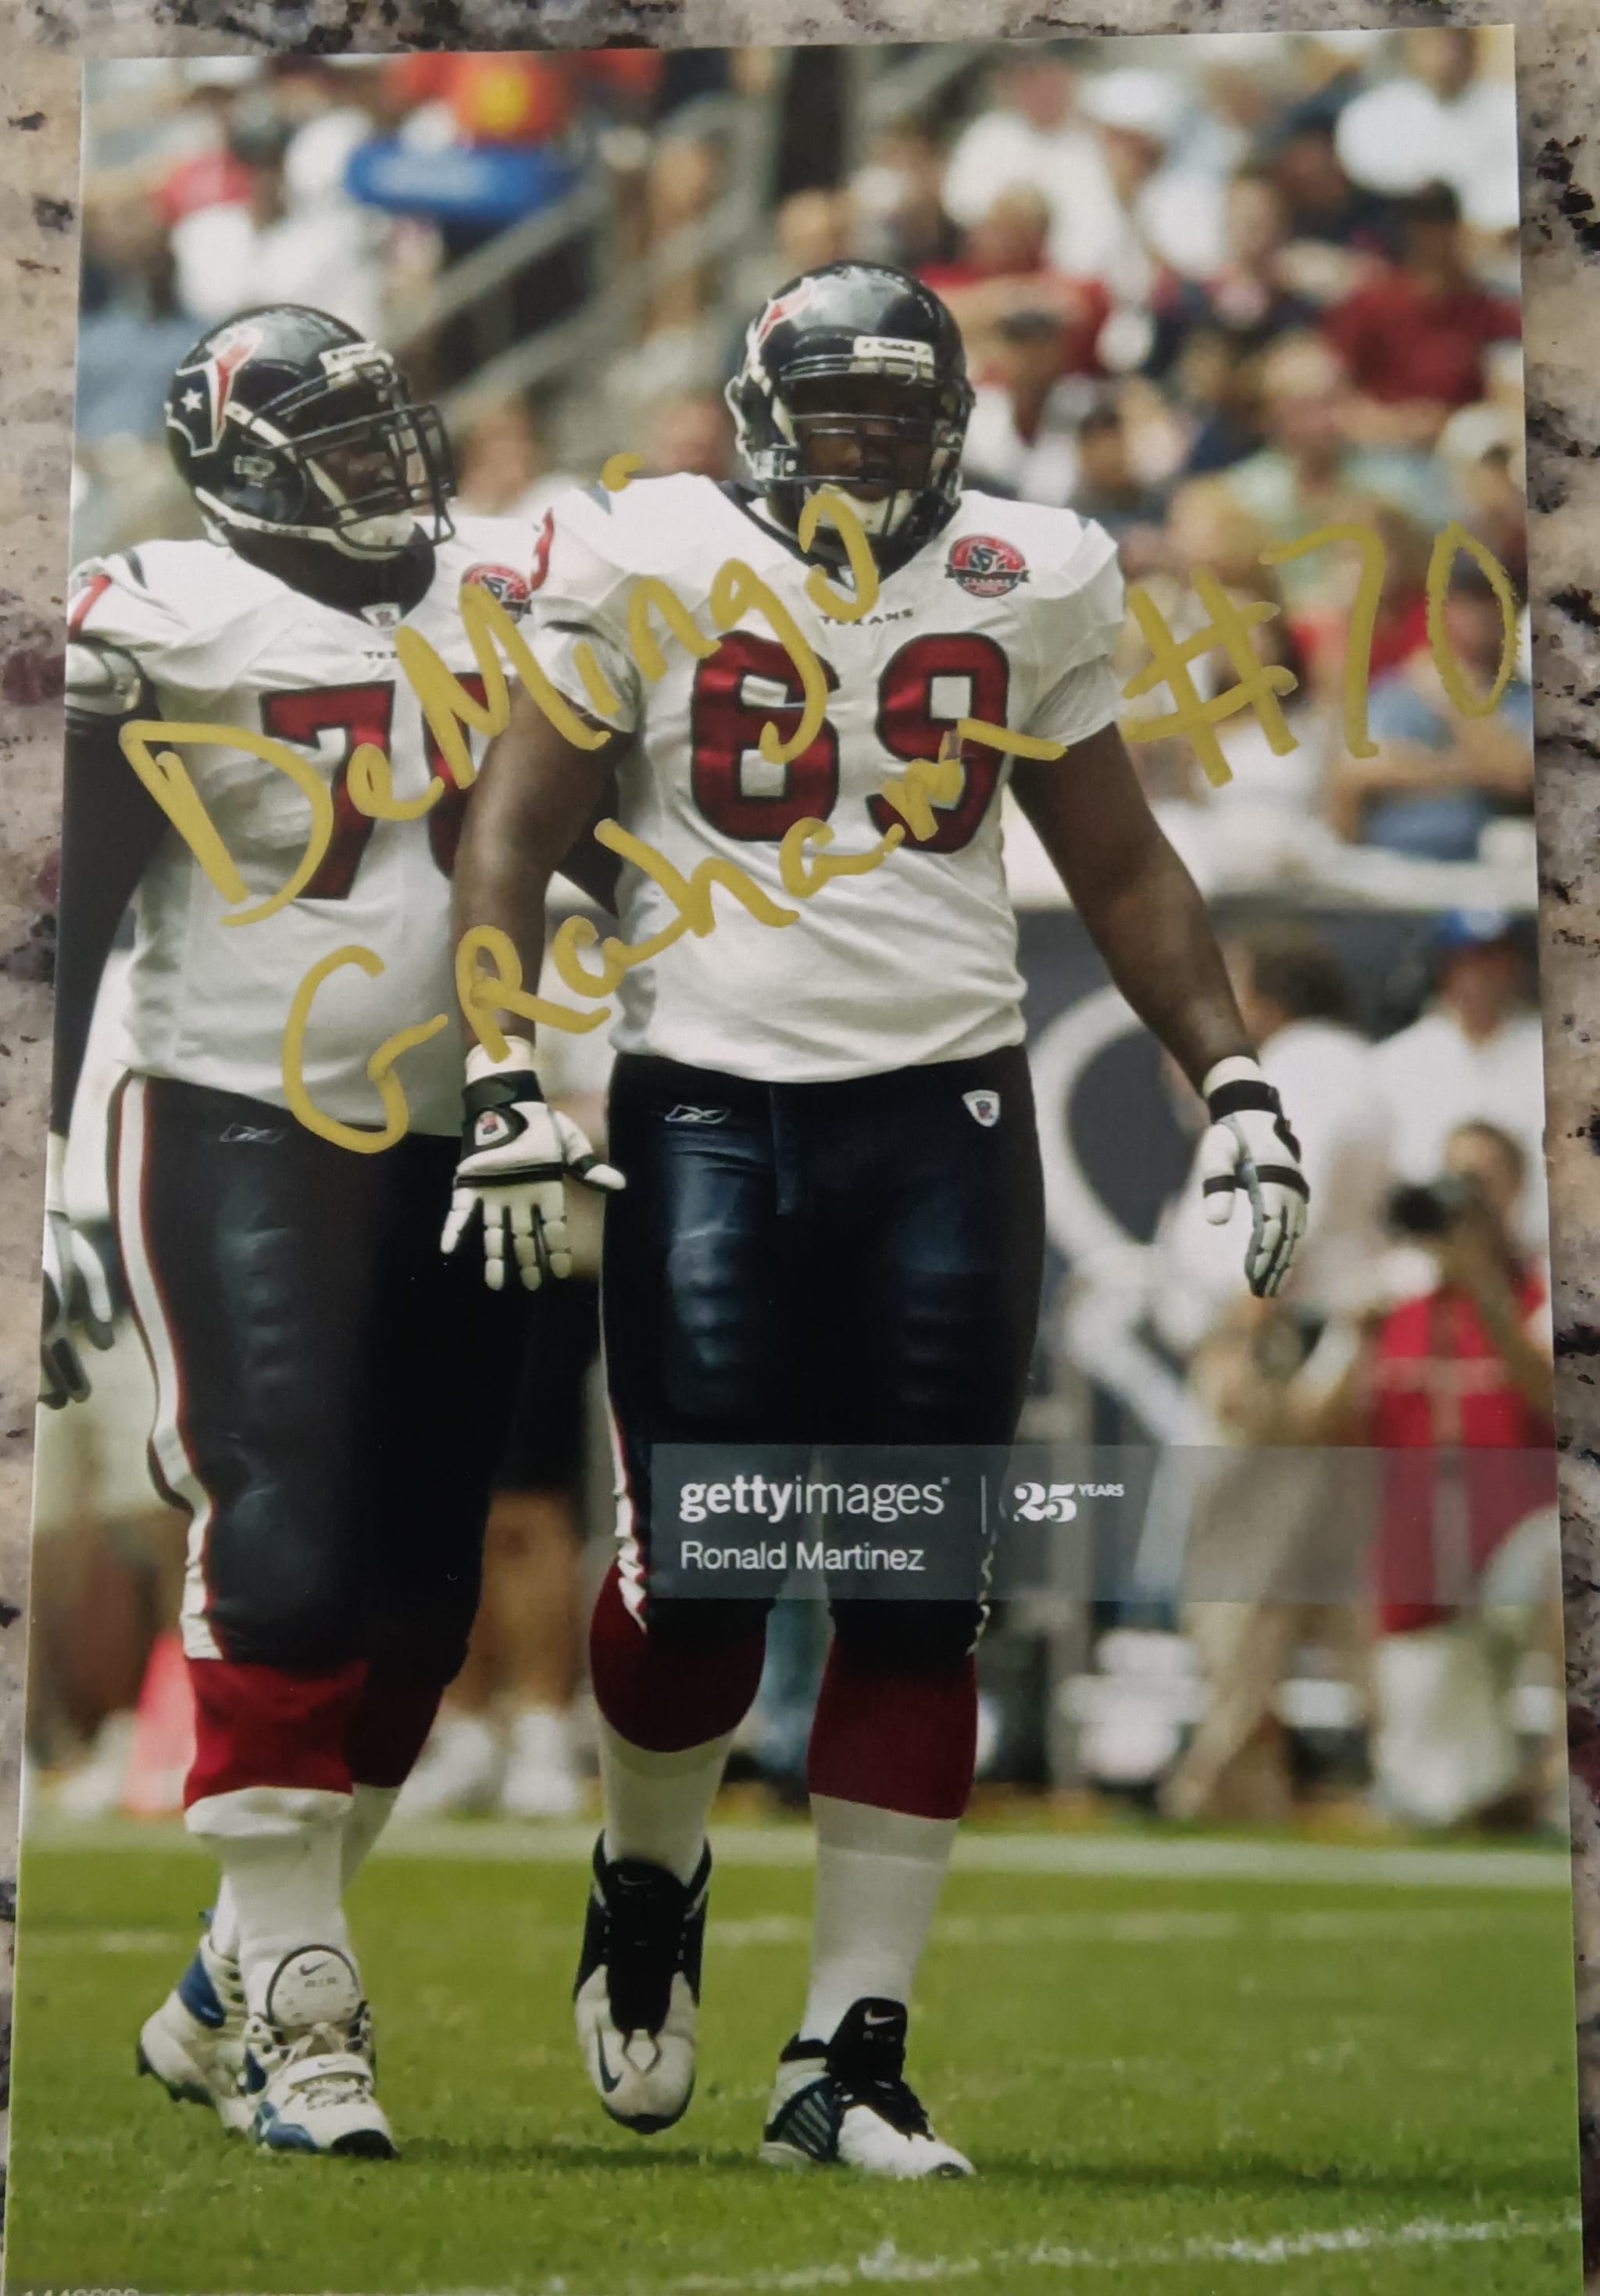 25 Years Of Getty Images (Houston Texans)